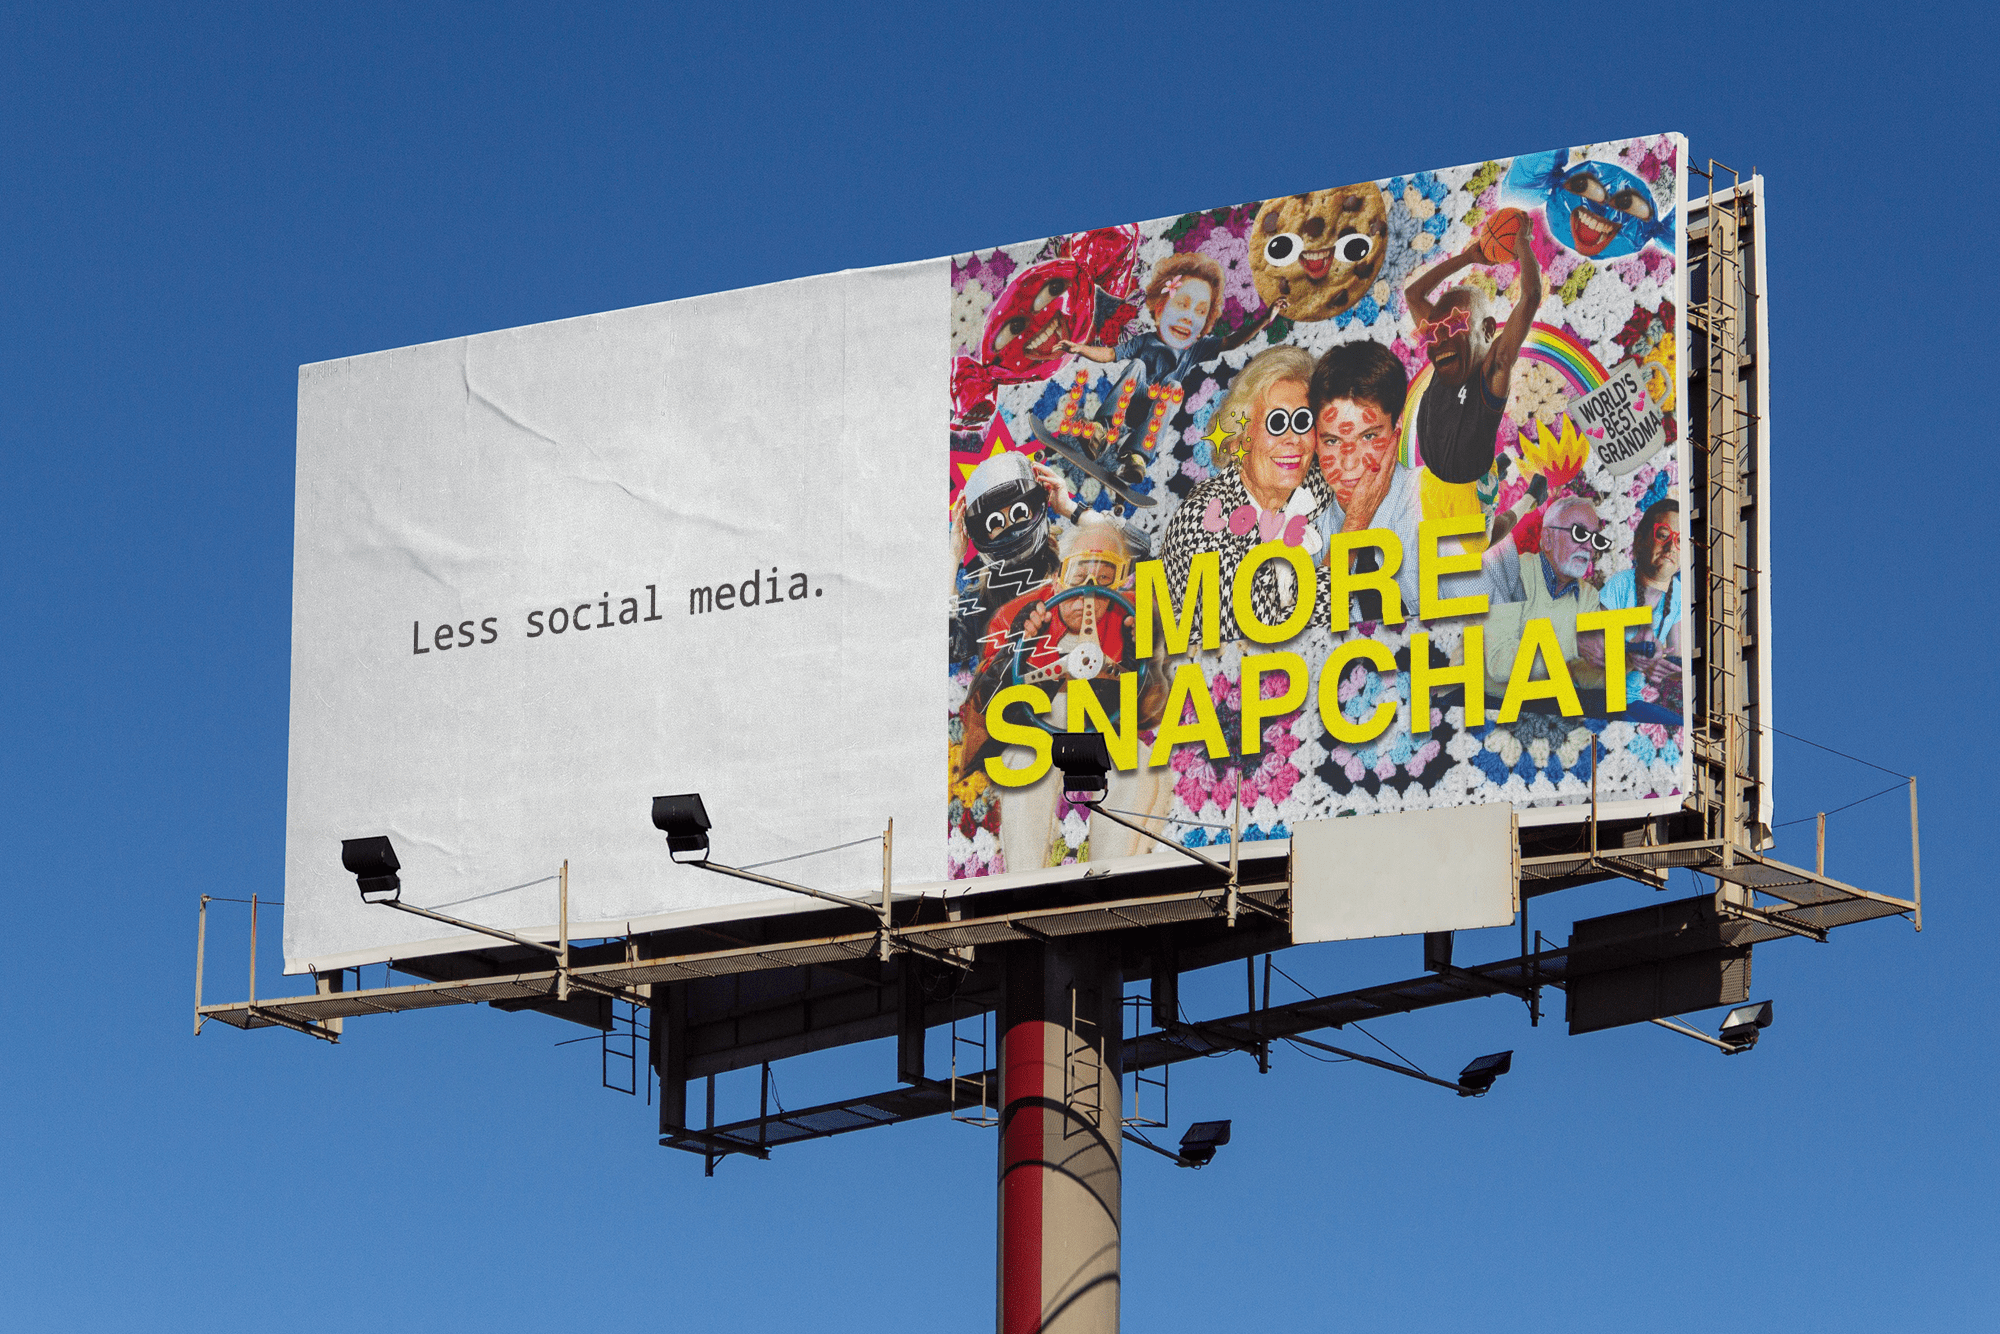 ‘We’re not social media’, warns Snapchat in new campaign